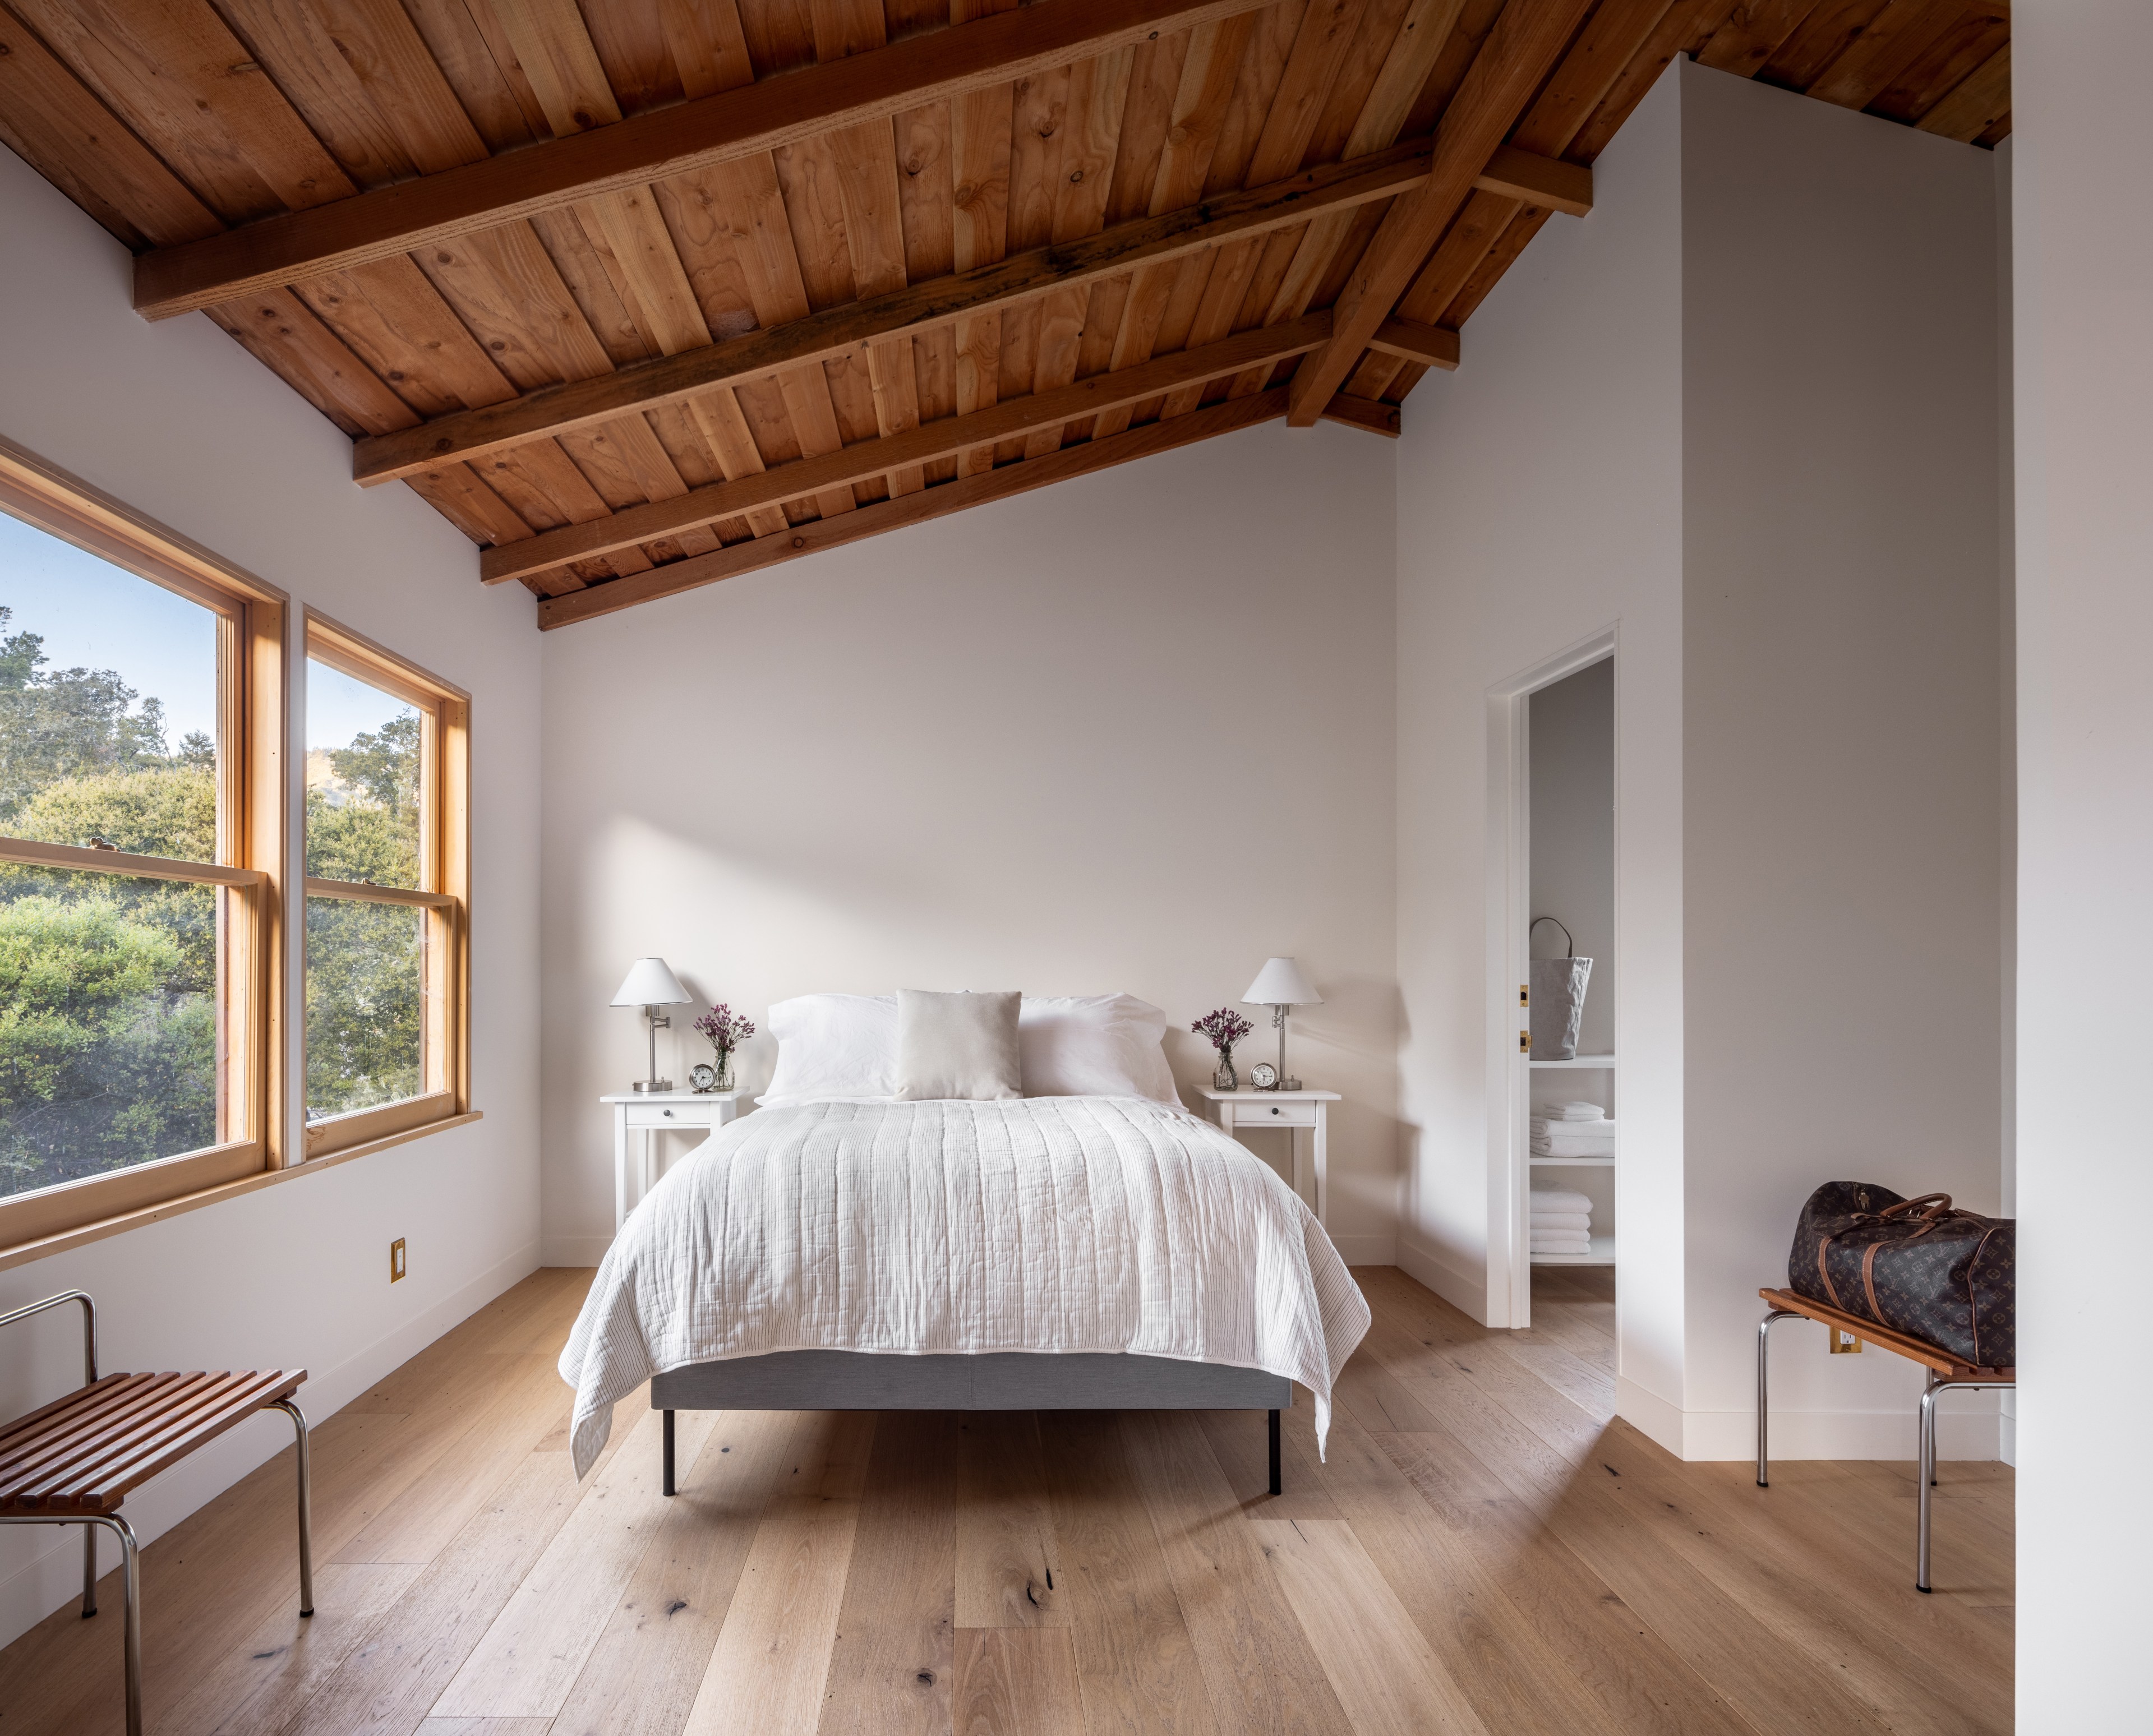 A serene bedroom with a wood beam ceiling, wooden floors, a double bed, two nightstands with lamps, and windows overlooking greenery.